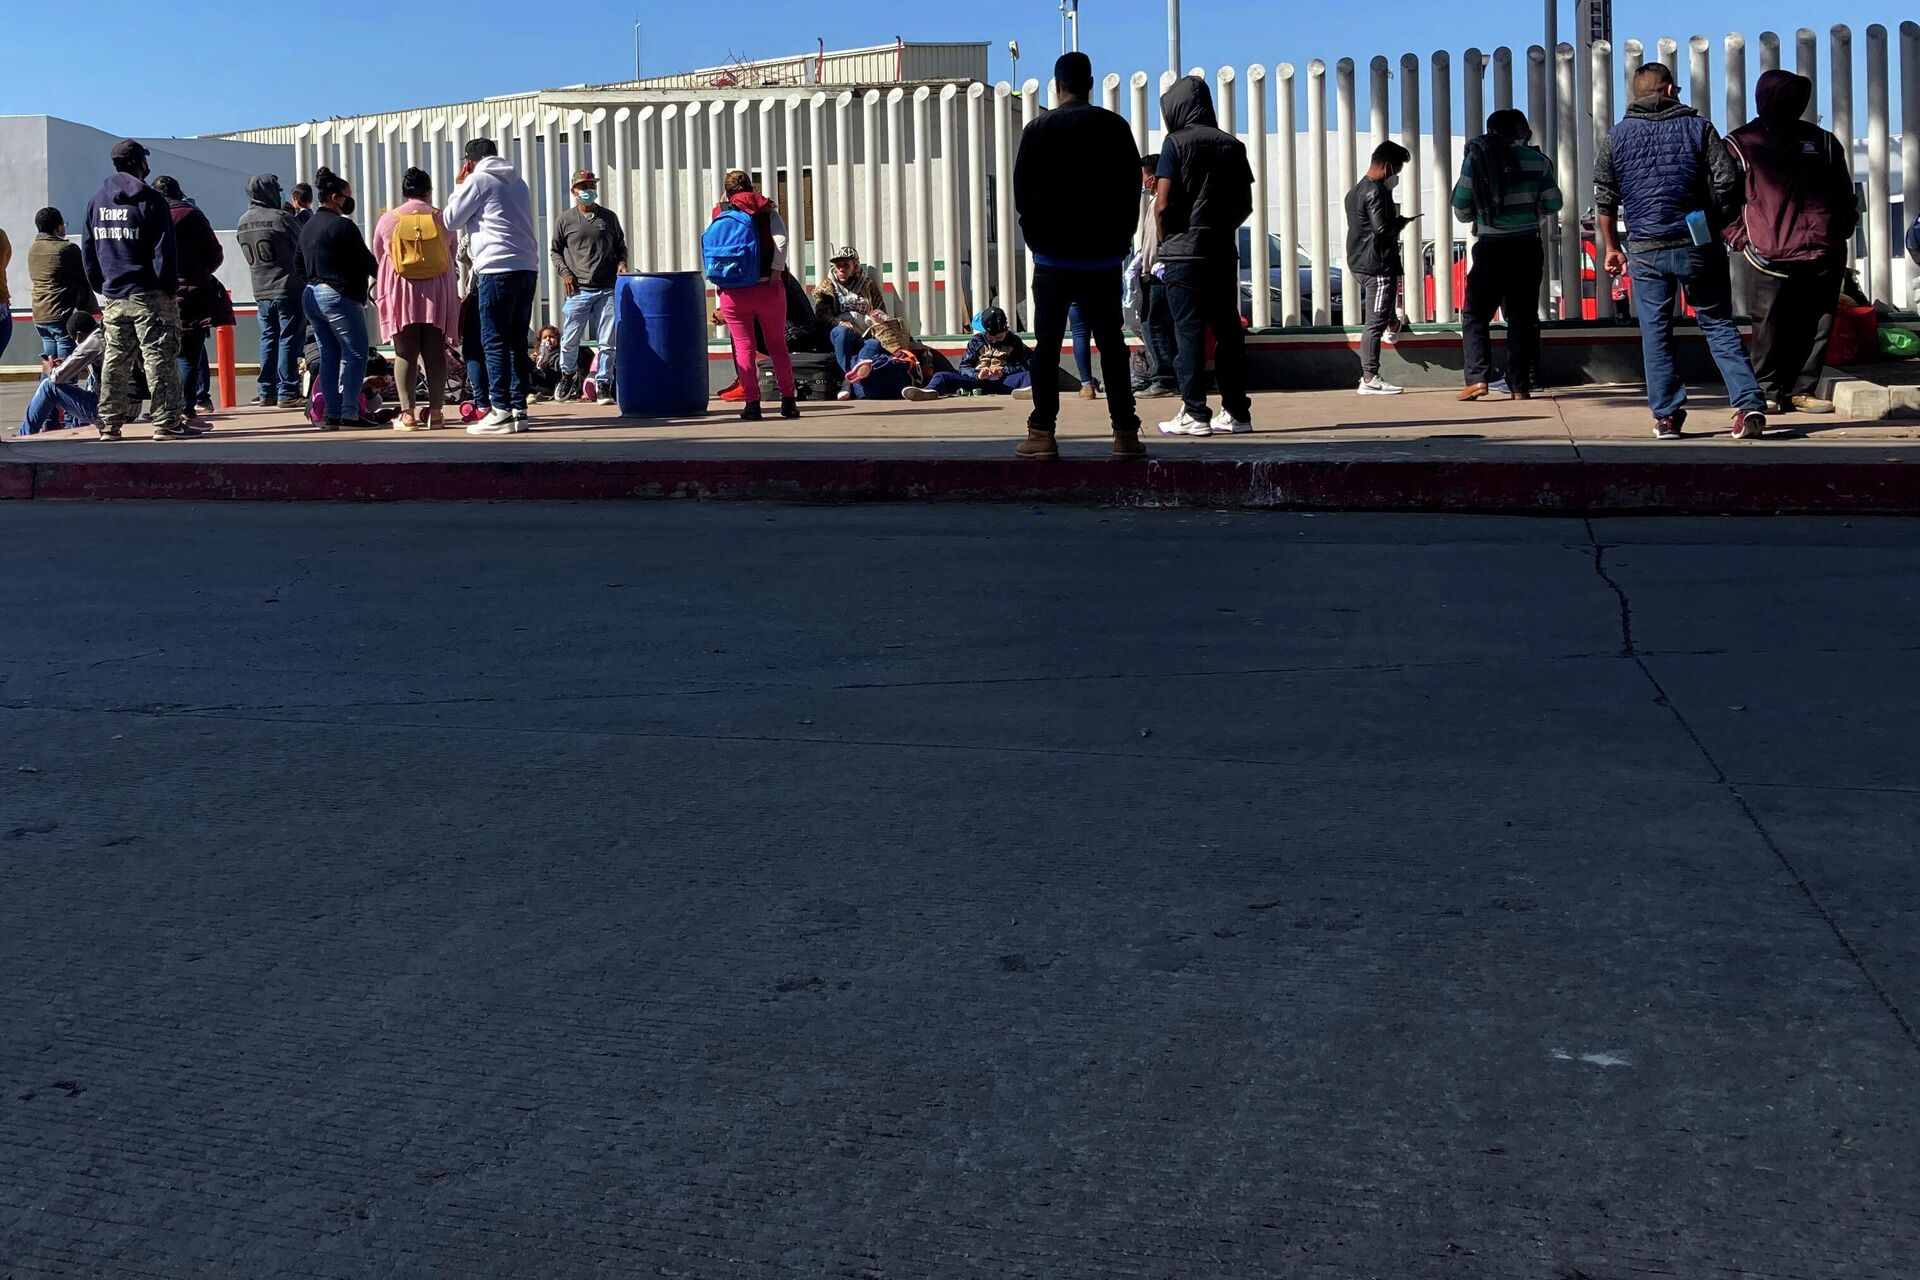 Migrants waiting to cross into the United States wait for news at the border crossing Wednesday, Feb. 17, 2021, in Tijuana, Mexico.   - Sputnik International, 1920, 15.12.2022